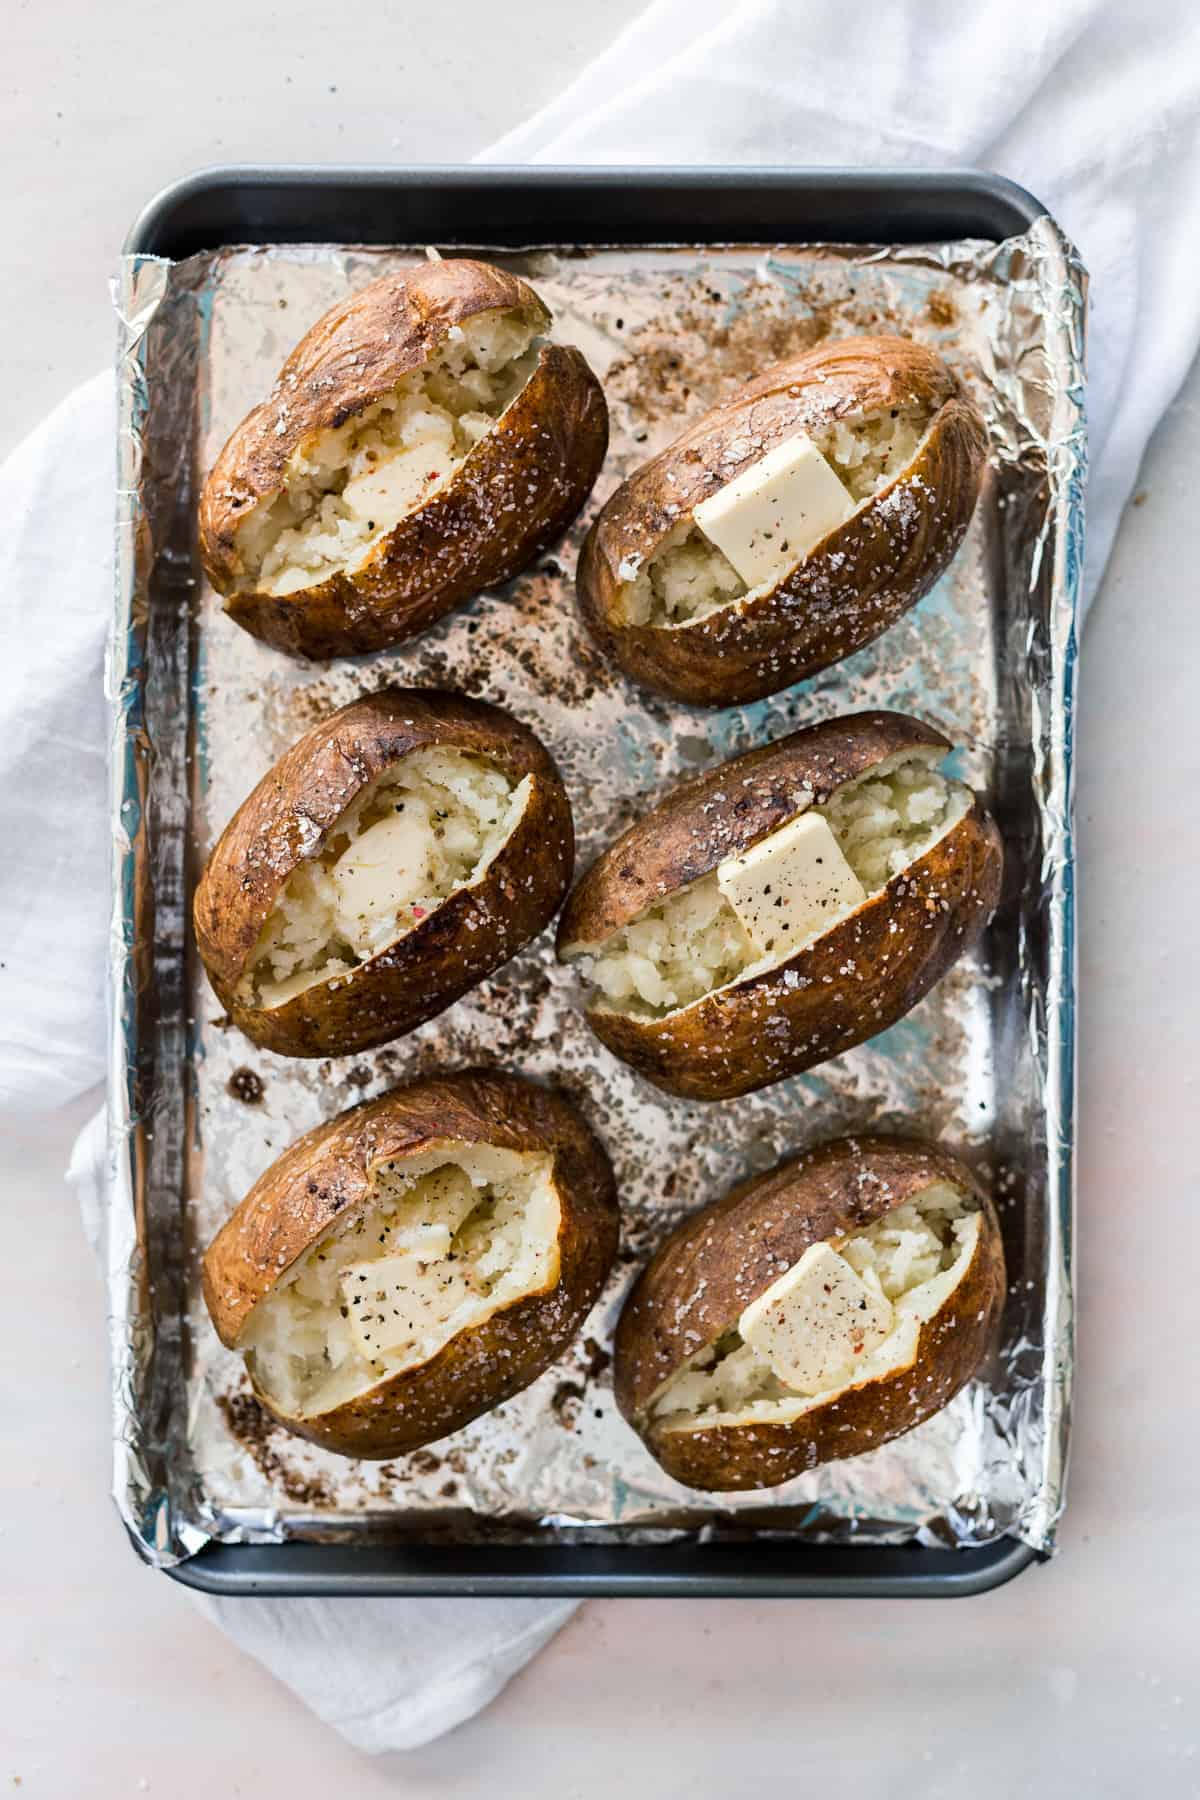 The perfect Steakhouse Baked Potato that is crispy on the outside and extra fluffy in the middle, made with only 3 simple ingredients and done in less than an hour!